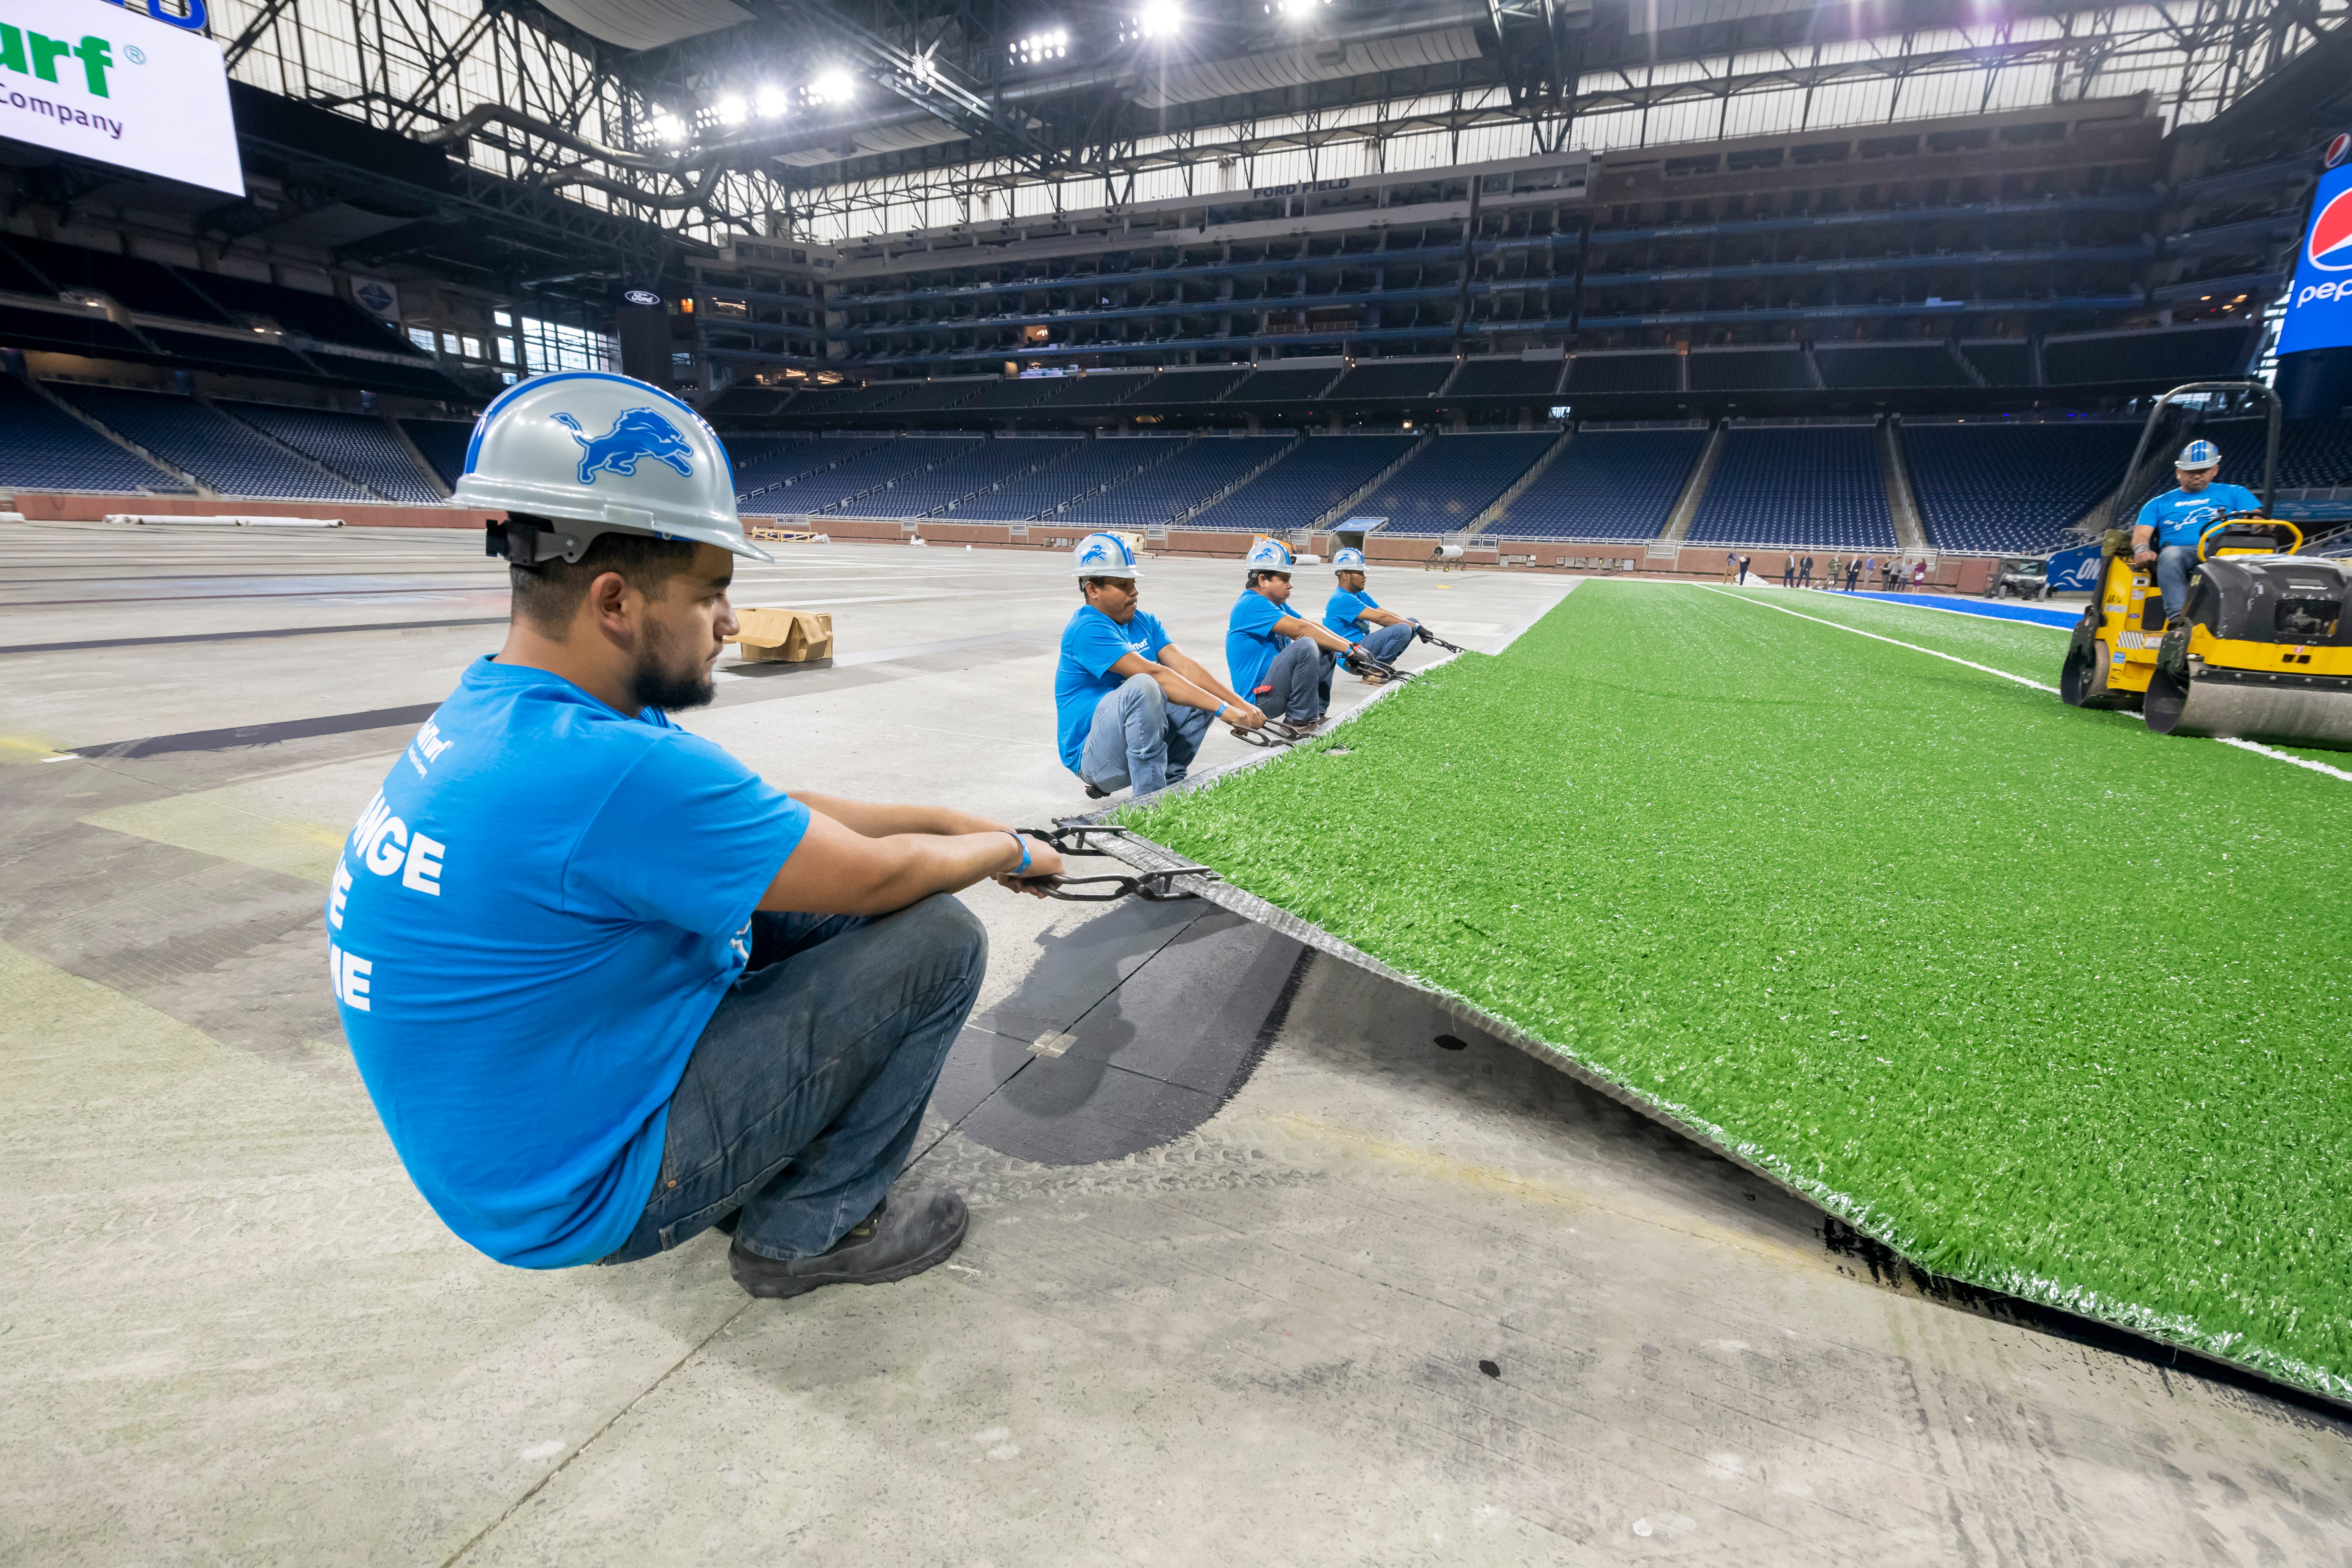 FieldTurf employees stretch the playing surface while installing it at Ford Field.